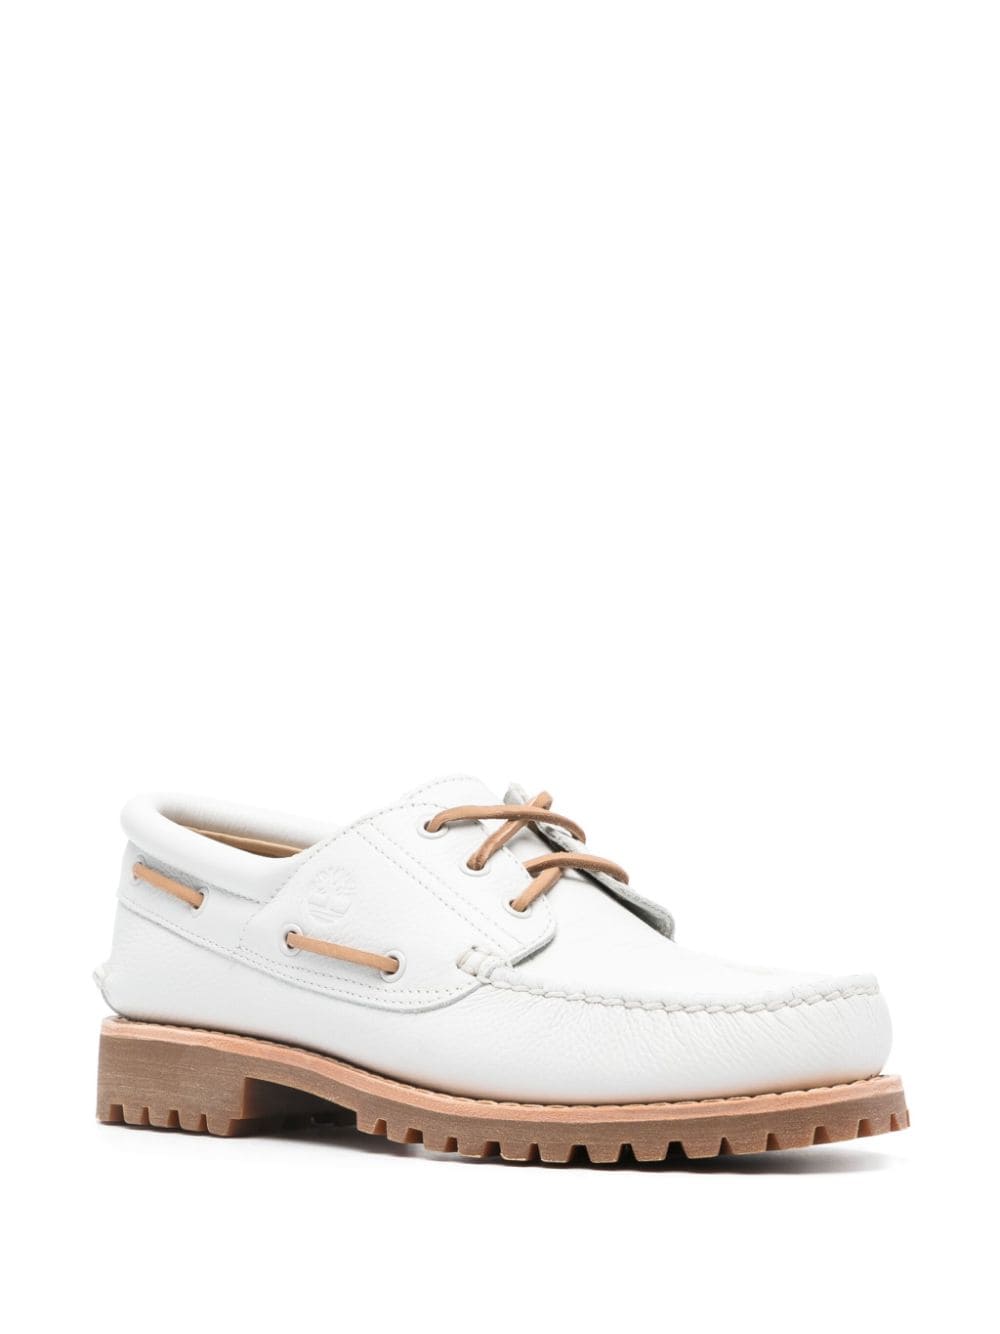 Leather boat shoes<BR/><BR/><BR/>